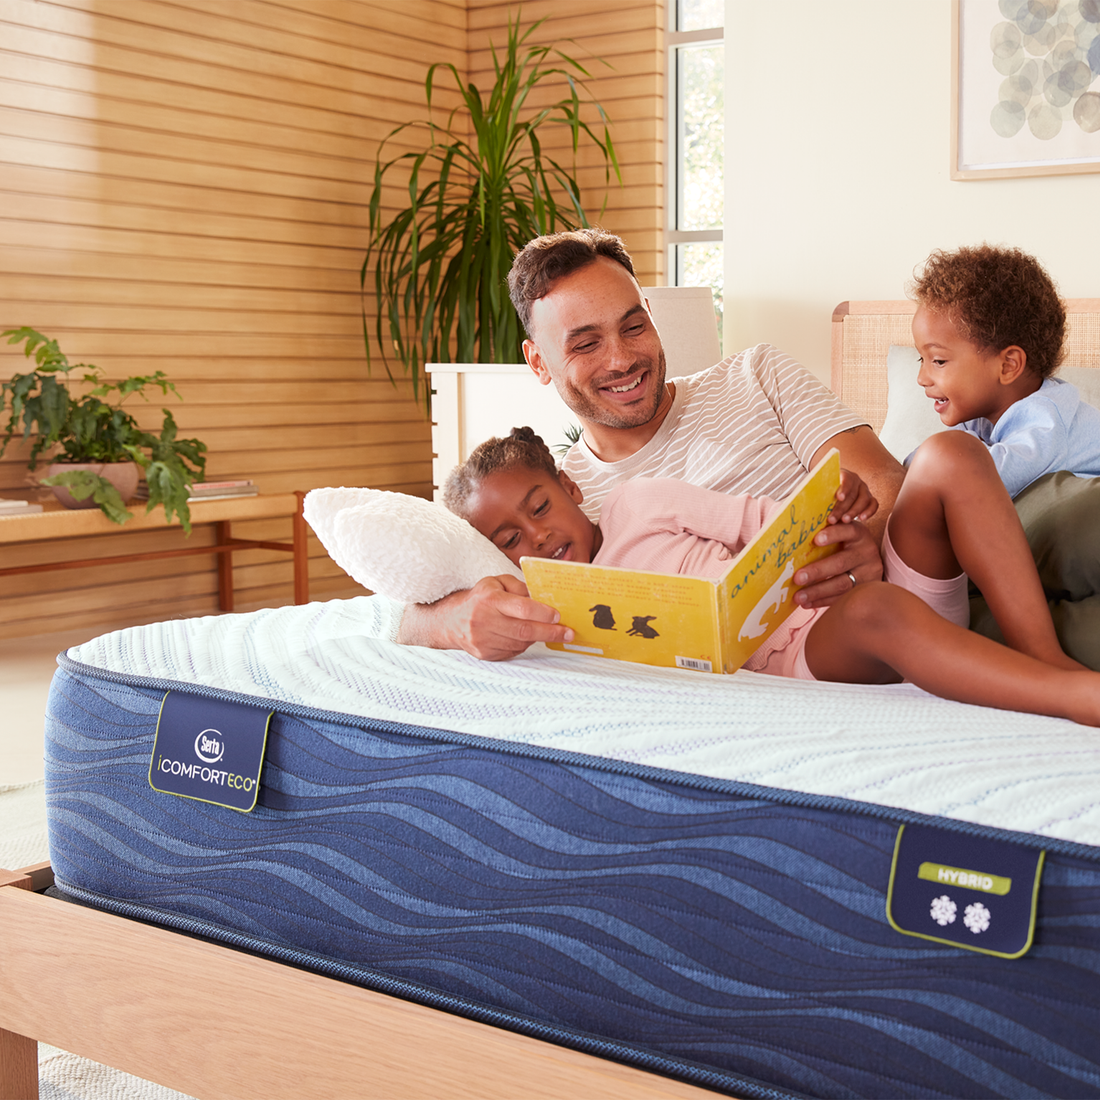 Experience the Unmatched Comfort: Introducing the S20GL Plush iComfort Eco Serta Mattress